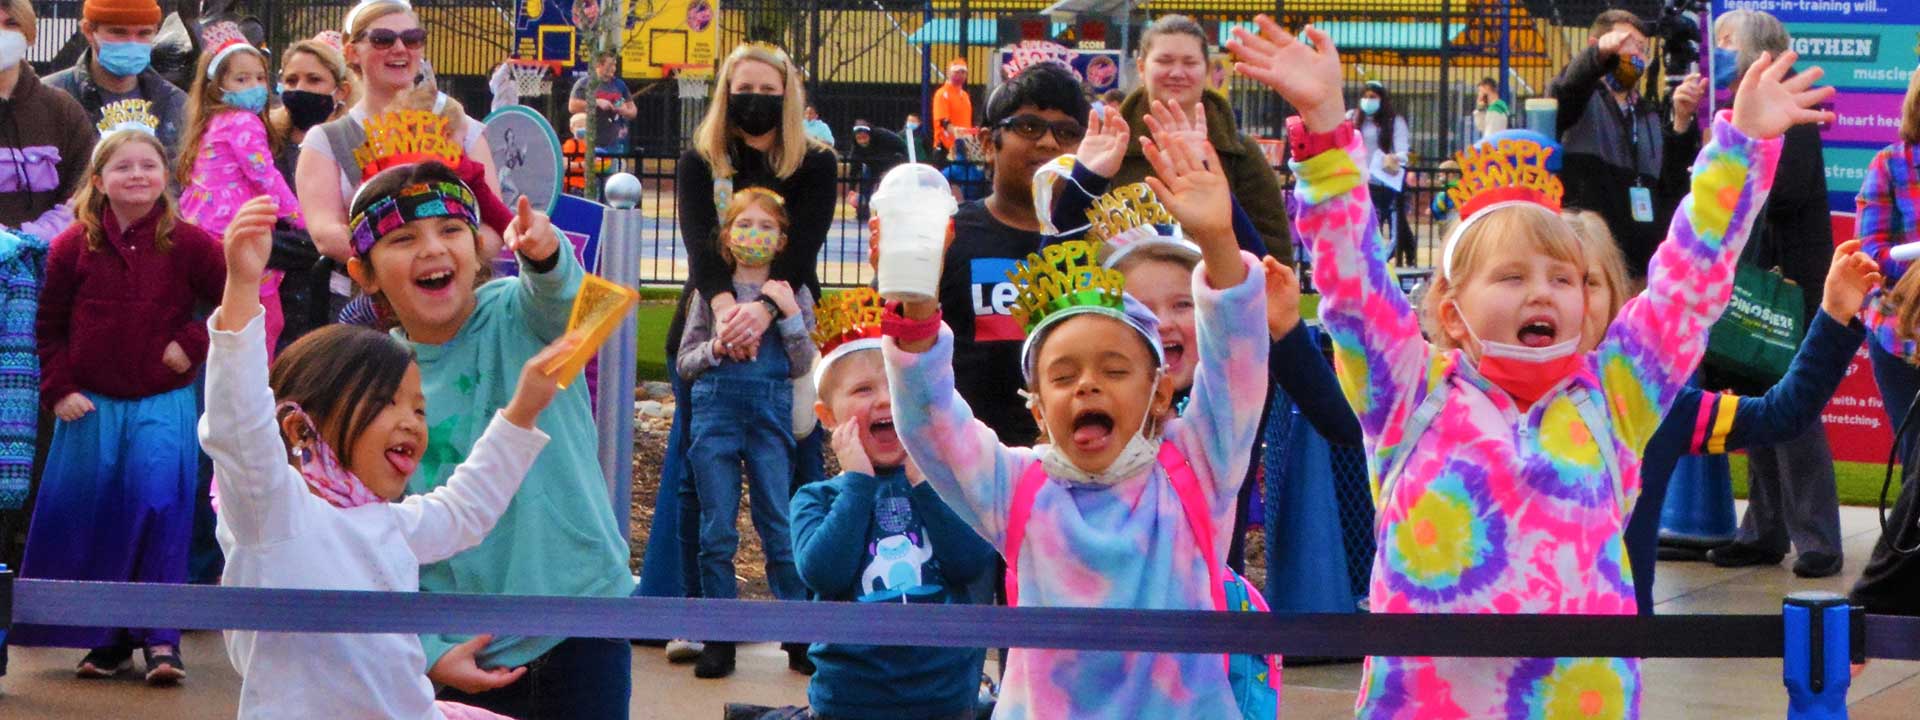 Children dancing and celebrating outside during Countdown to Noon in the Riley Children's Health Sports Legends Experience at The Children's Museum of Indianapolis